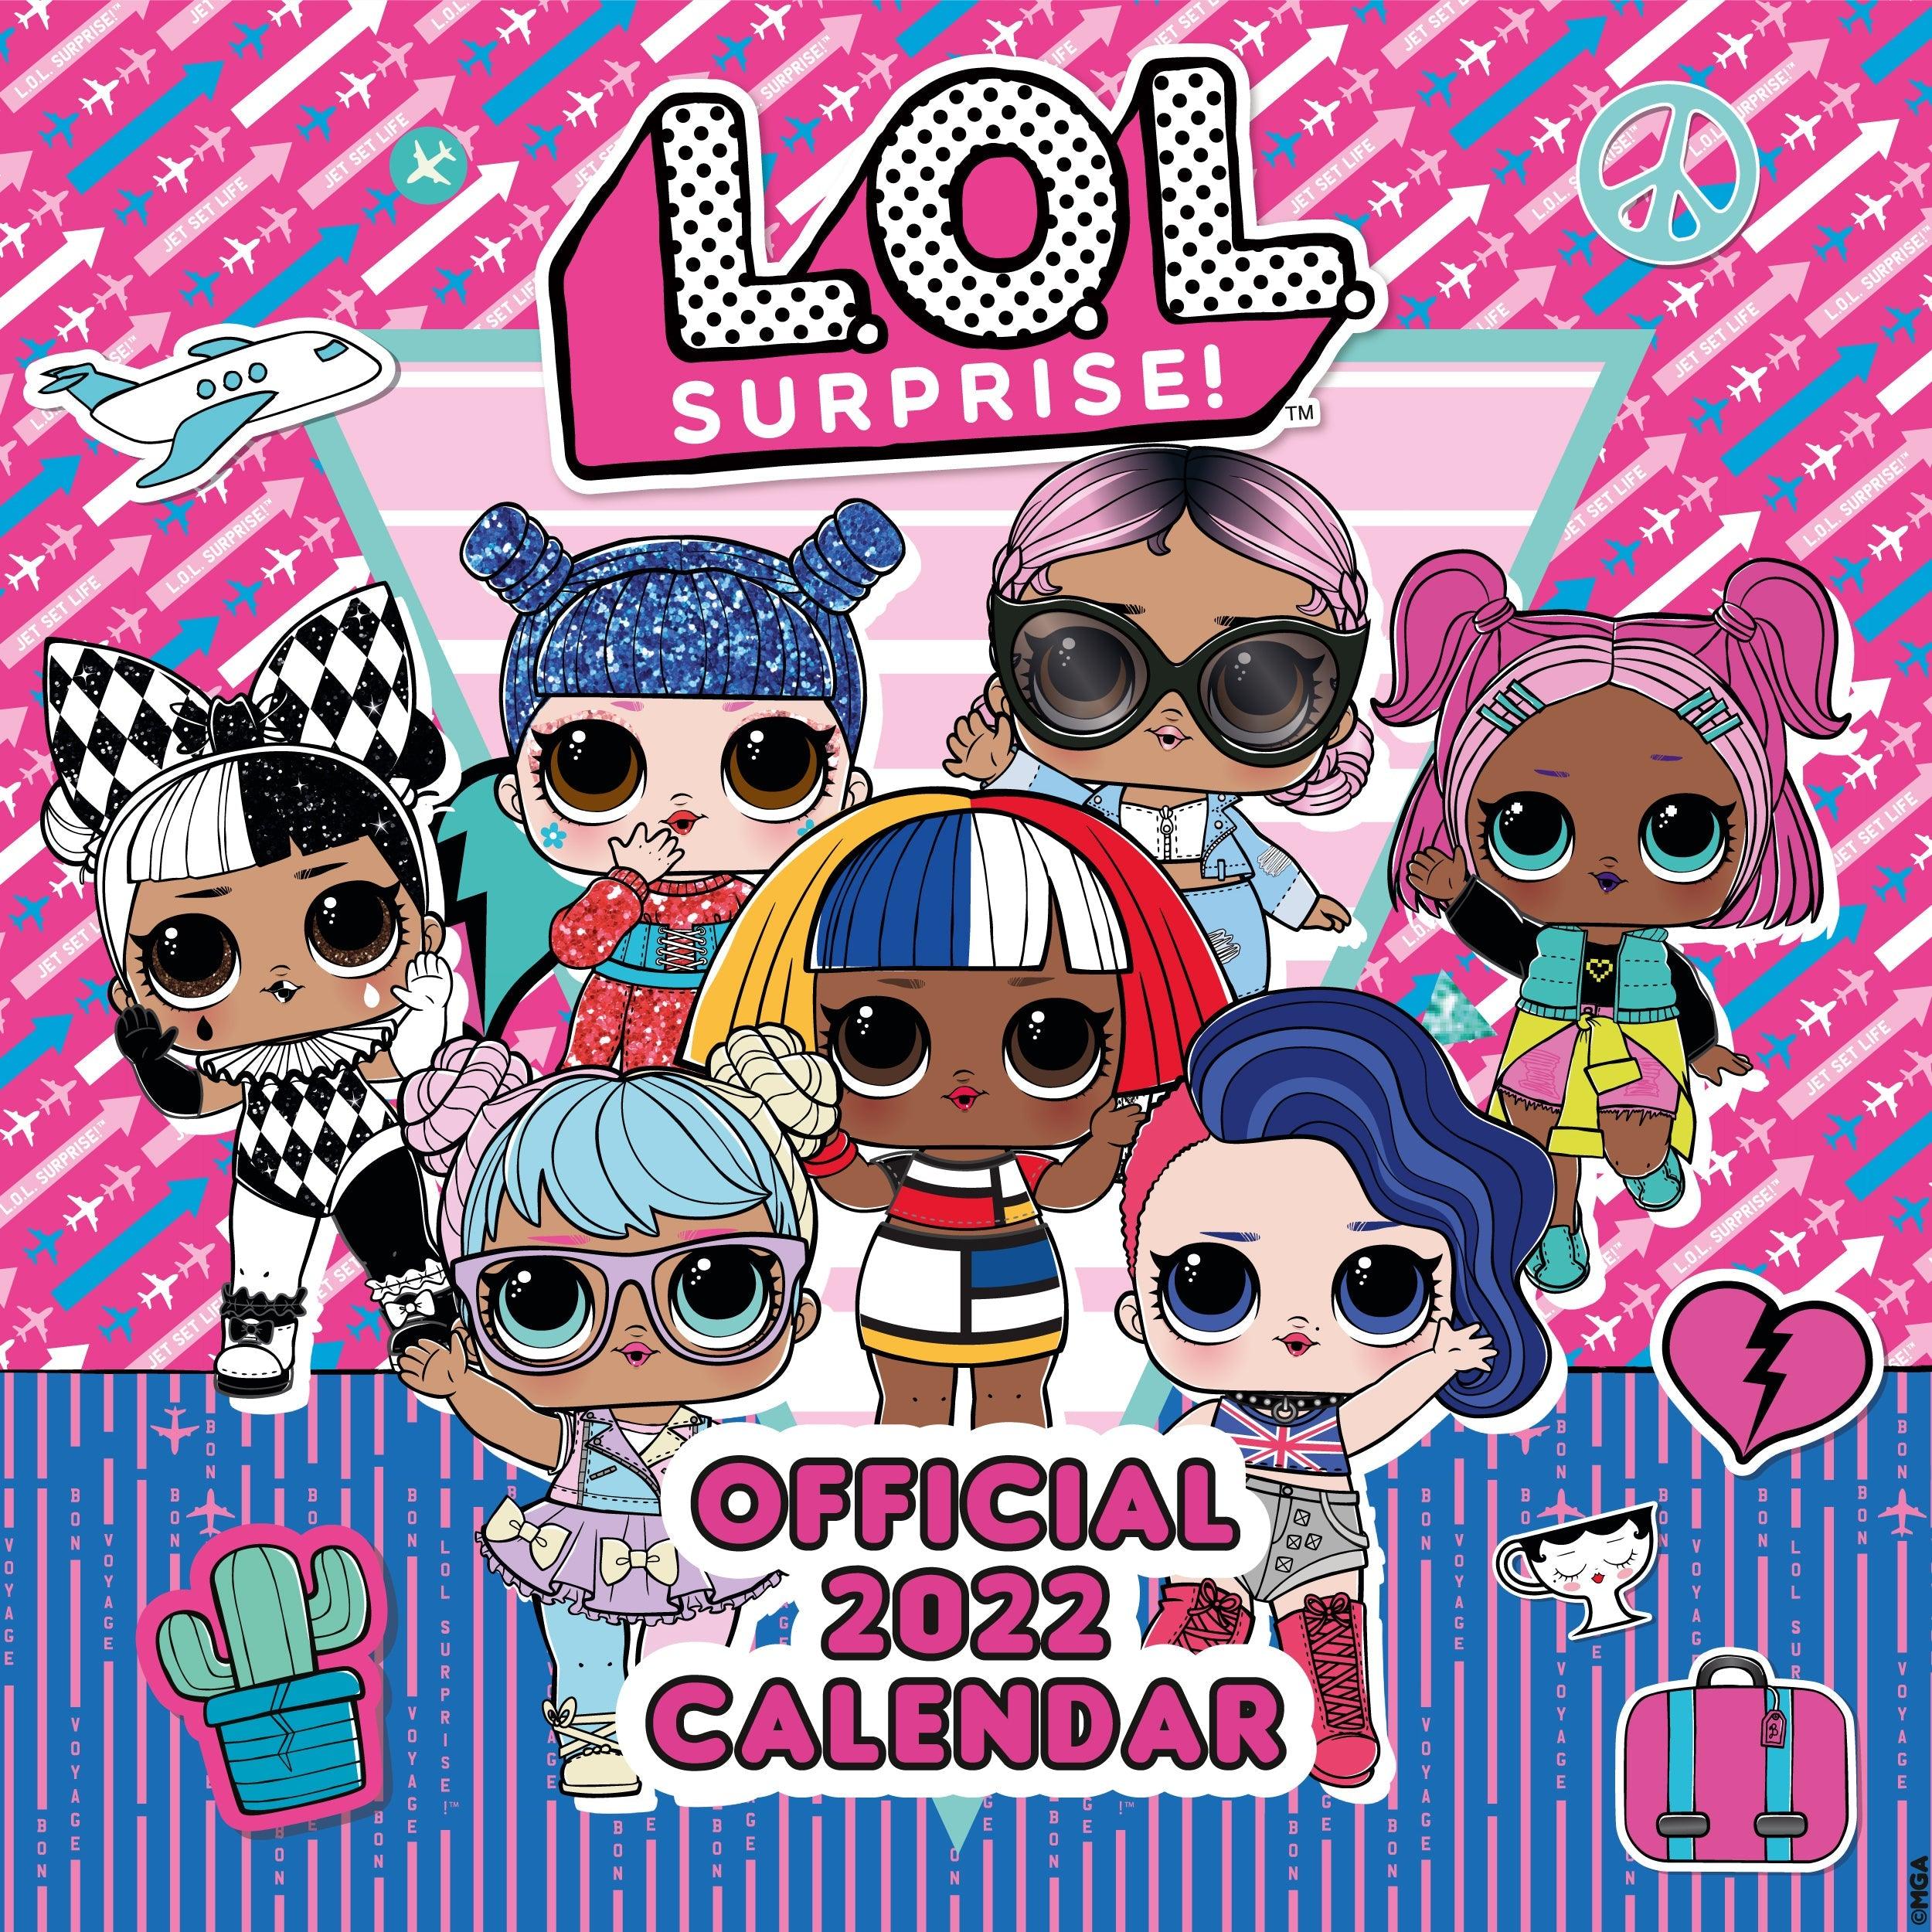 Why L.O.L. Surprise! dolls are Xmas hits: The unwrapping is pure drama